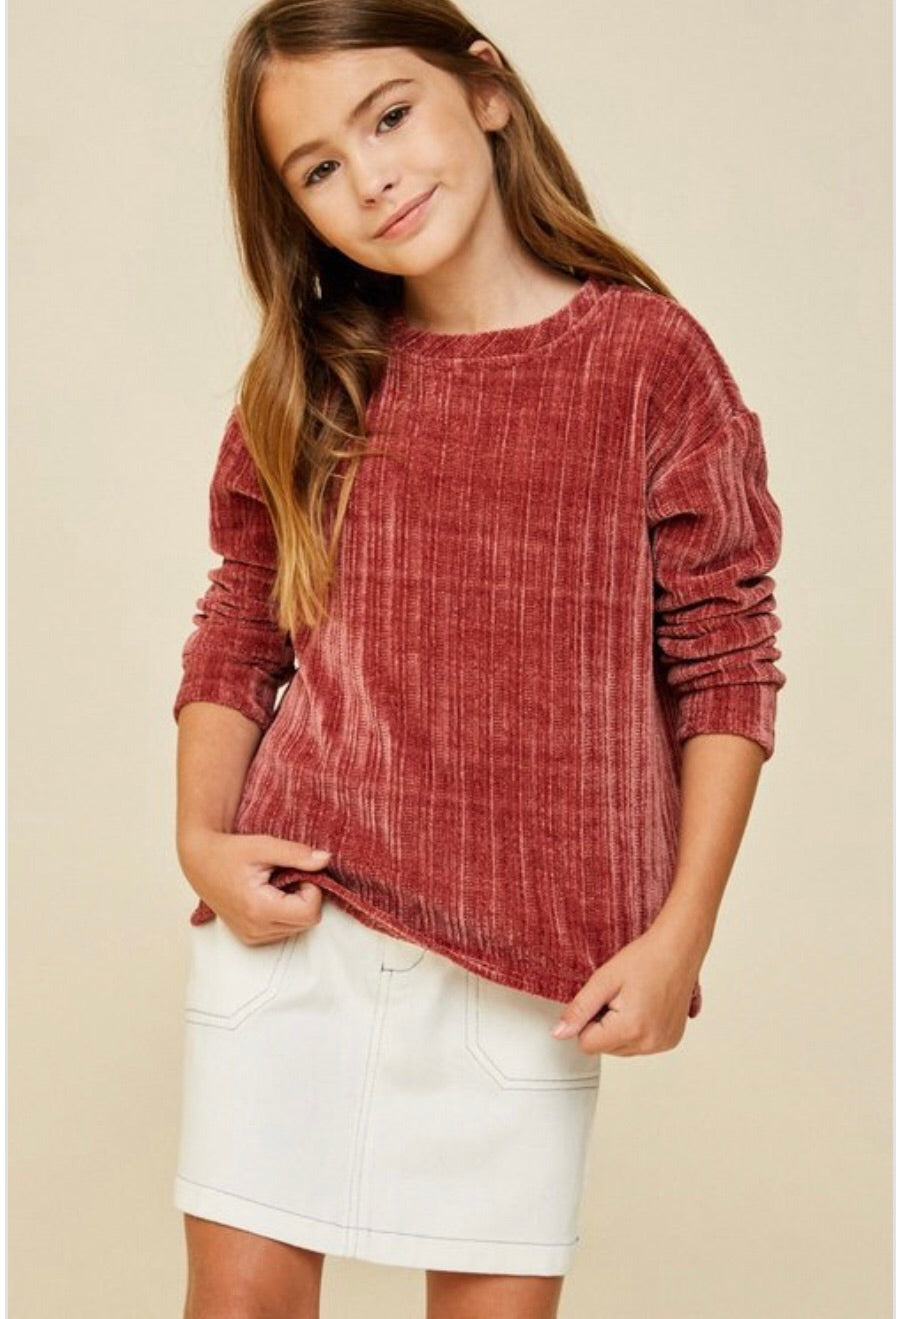 Corduroy knit sweater top